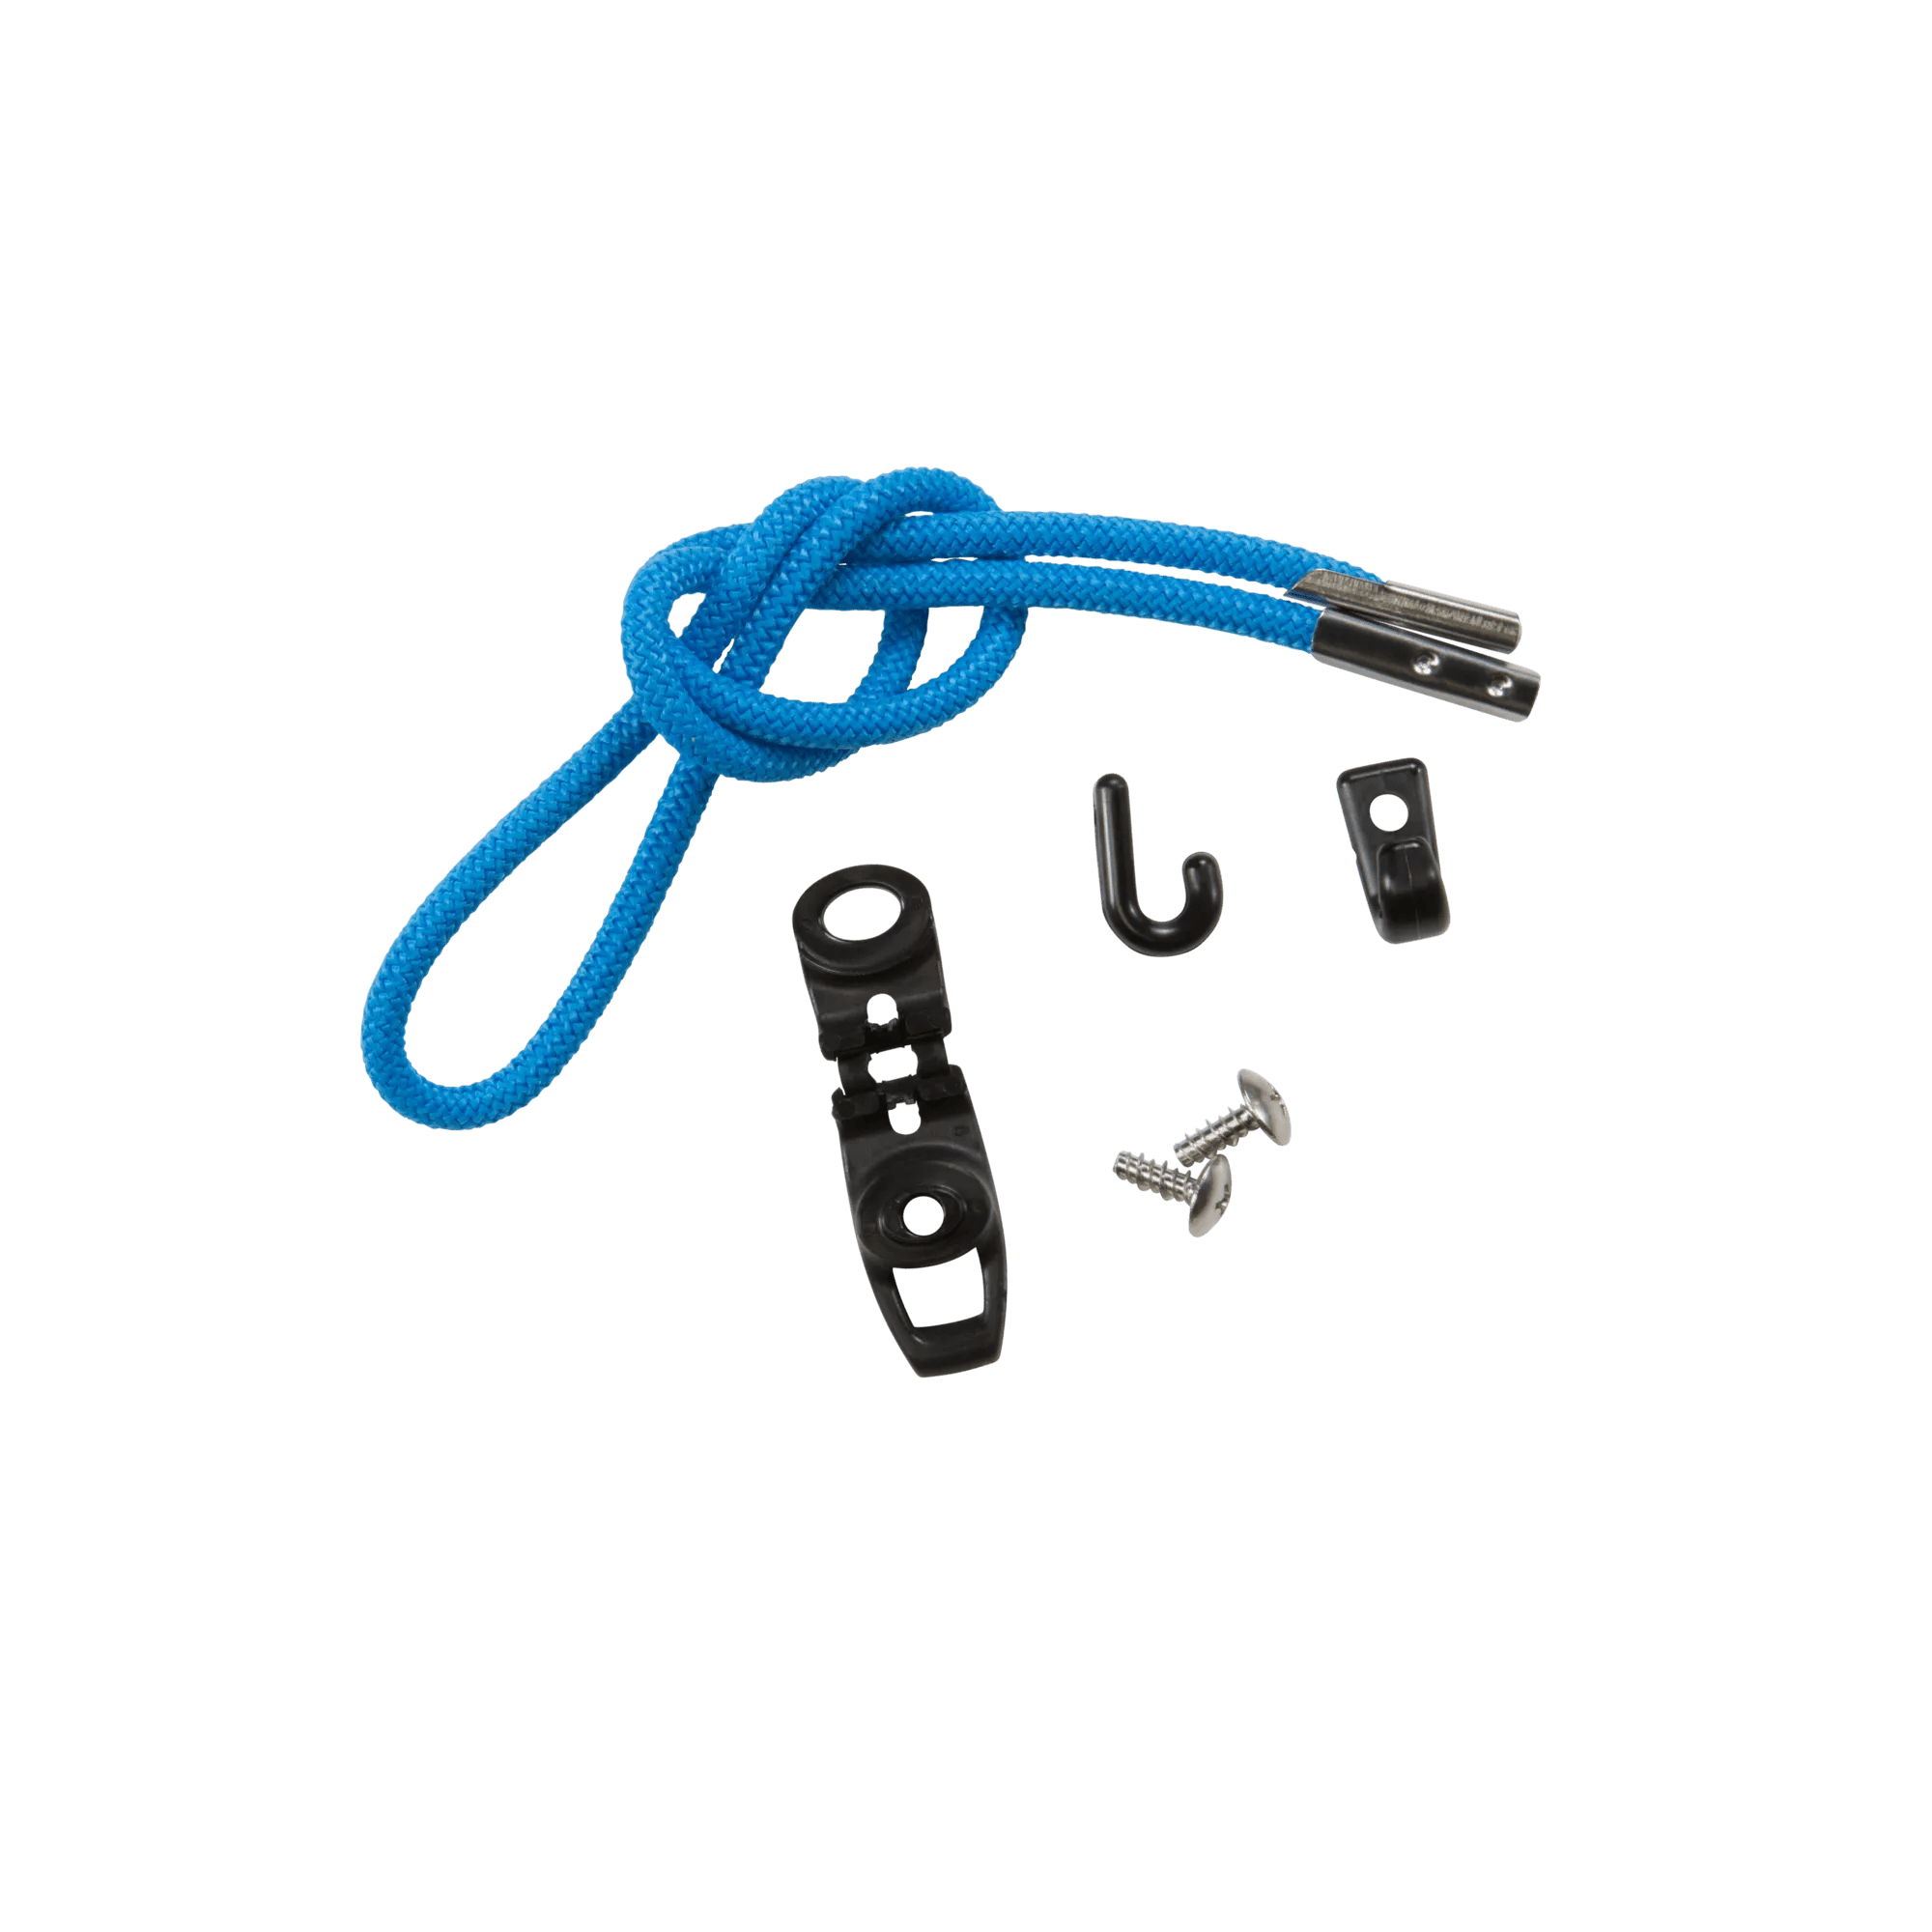 PELICAN - Electric Blue 25" (63.5 cm) Multi-Purpose Bungee Cord with Hook -  - PS1585 - ISO 